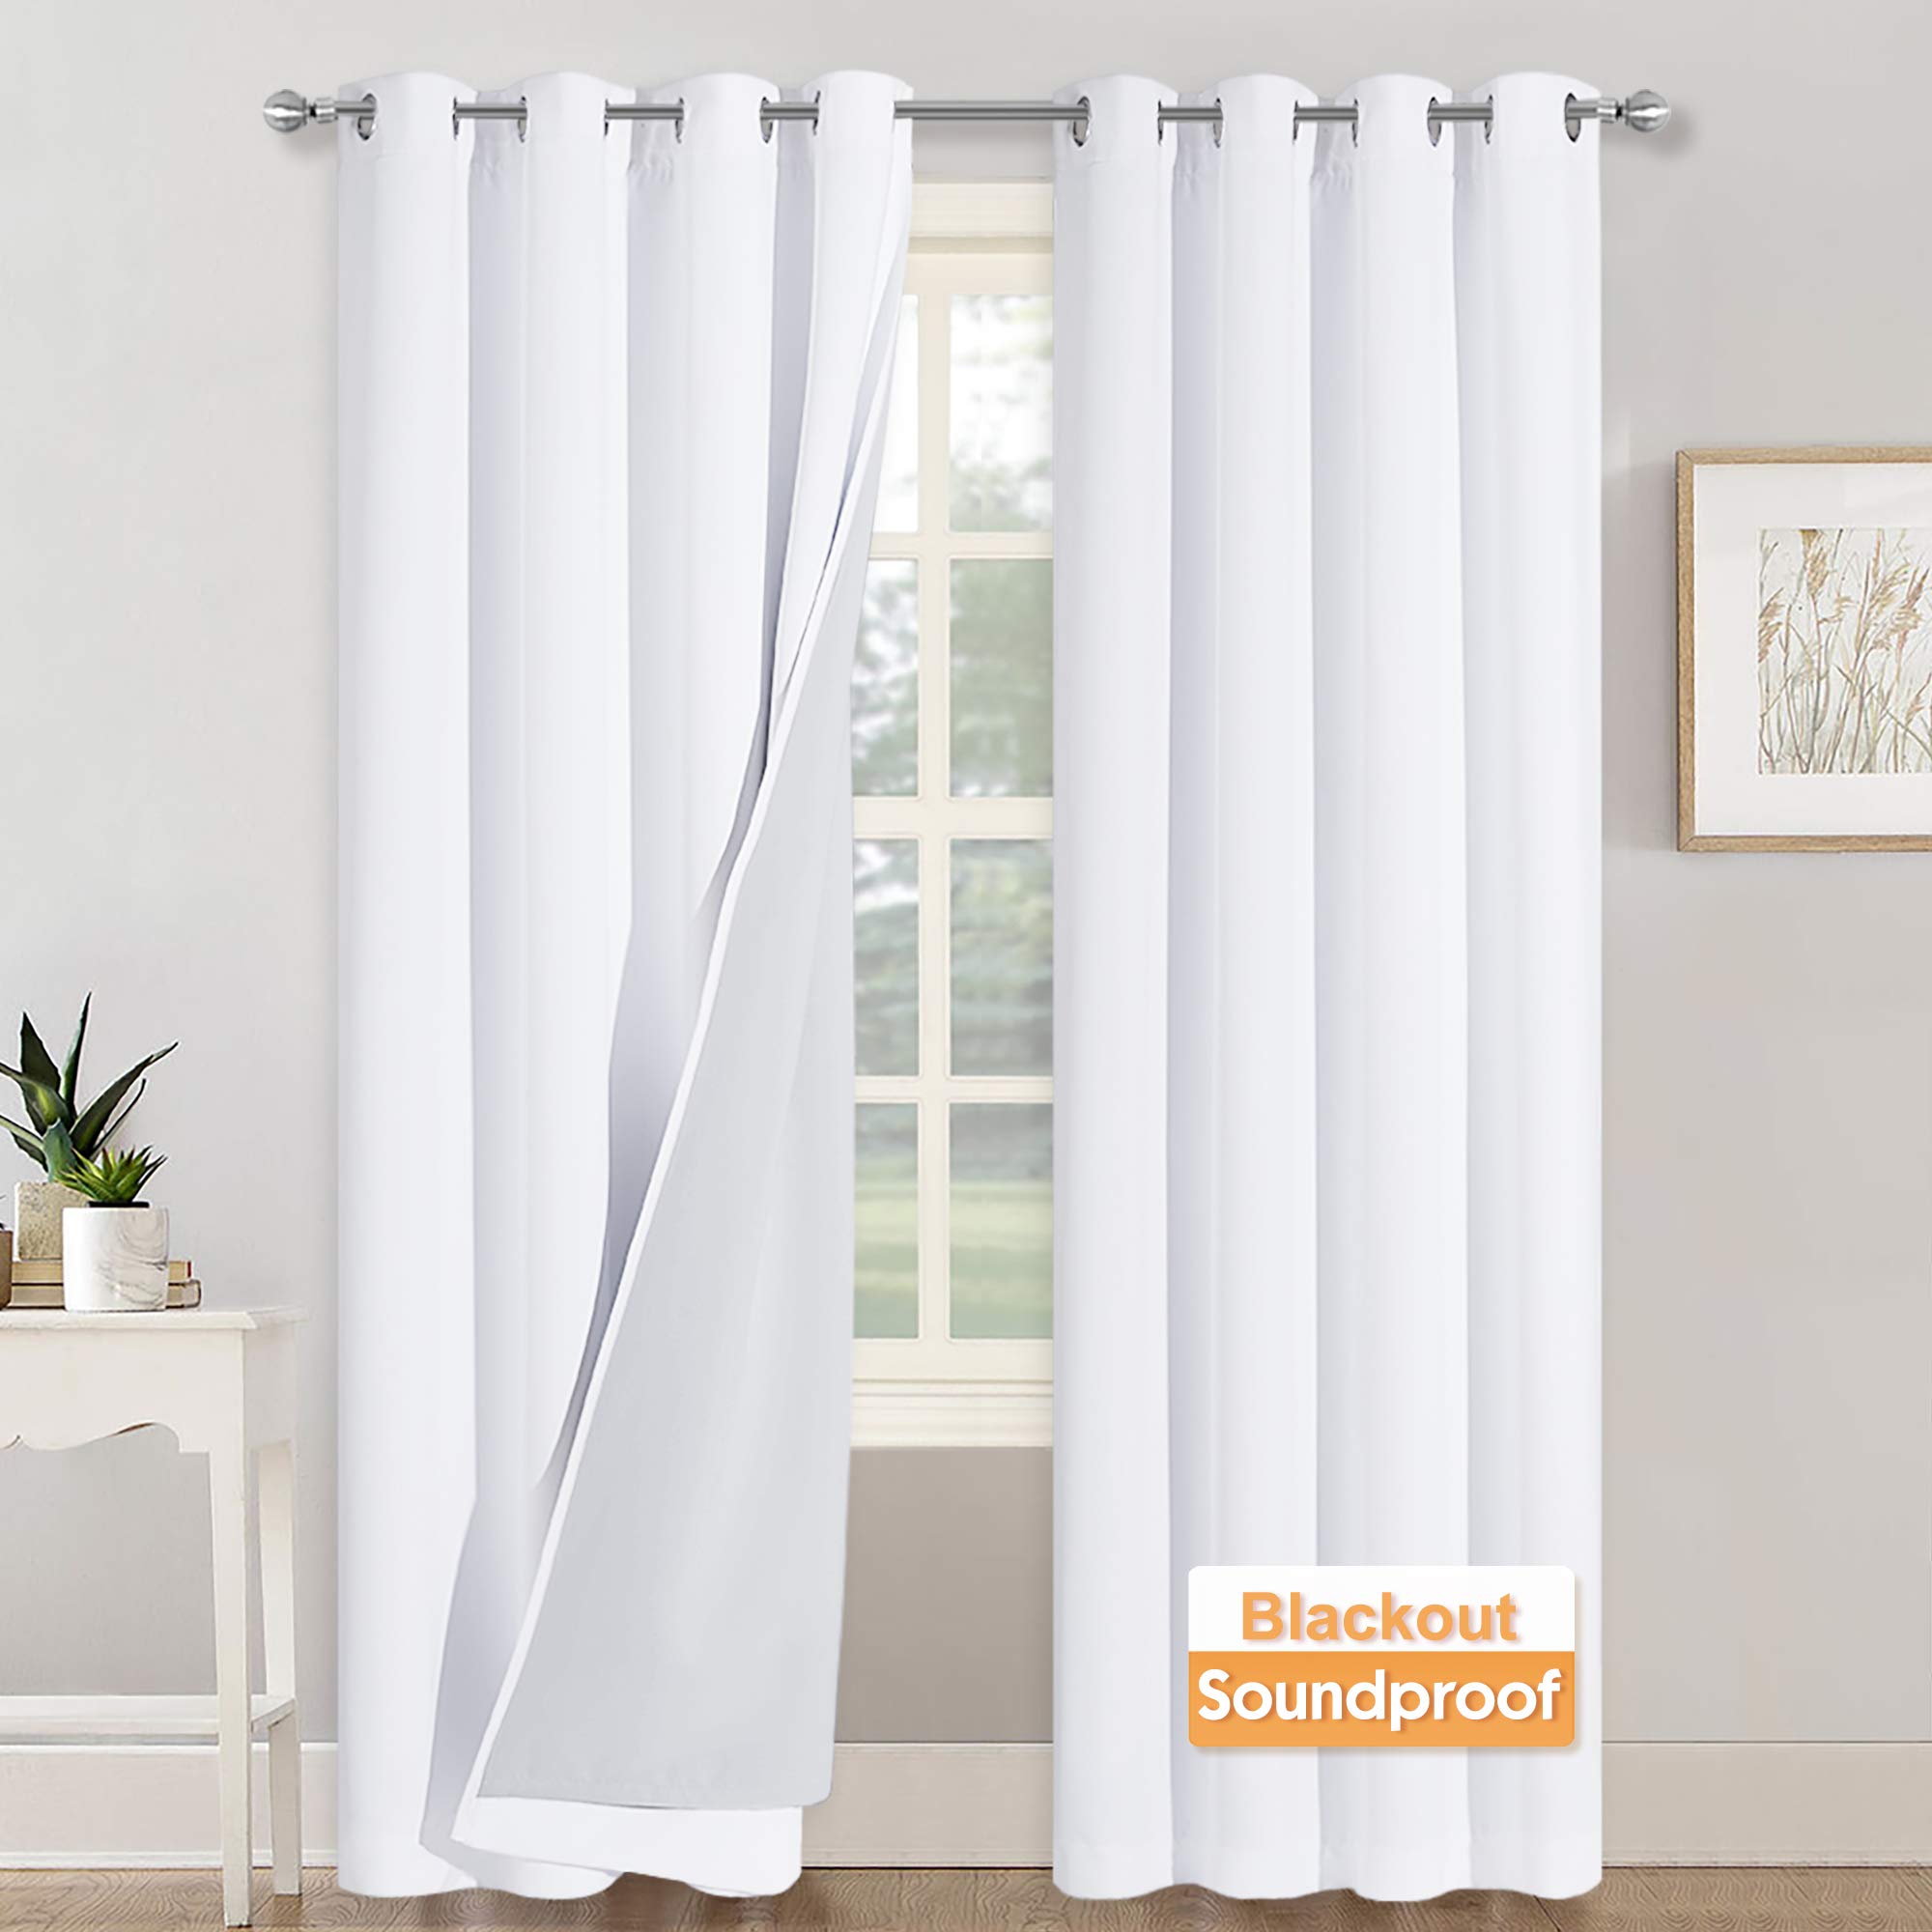 RYB HOME Soundproof Divider Curtains Blackout Curtains for Living Room Window, Inside Felf Linings Insulted Heat Cold Noise Shade Drapes for Slidin...